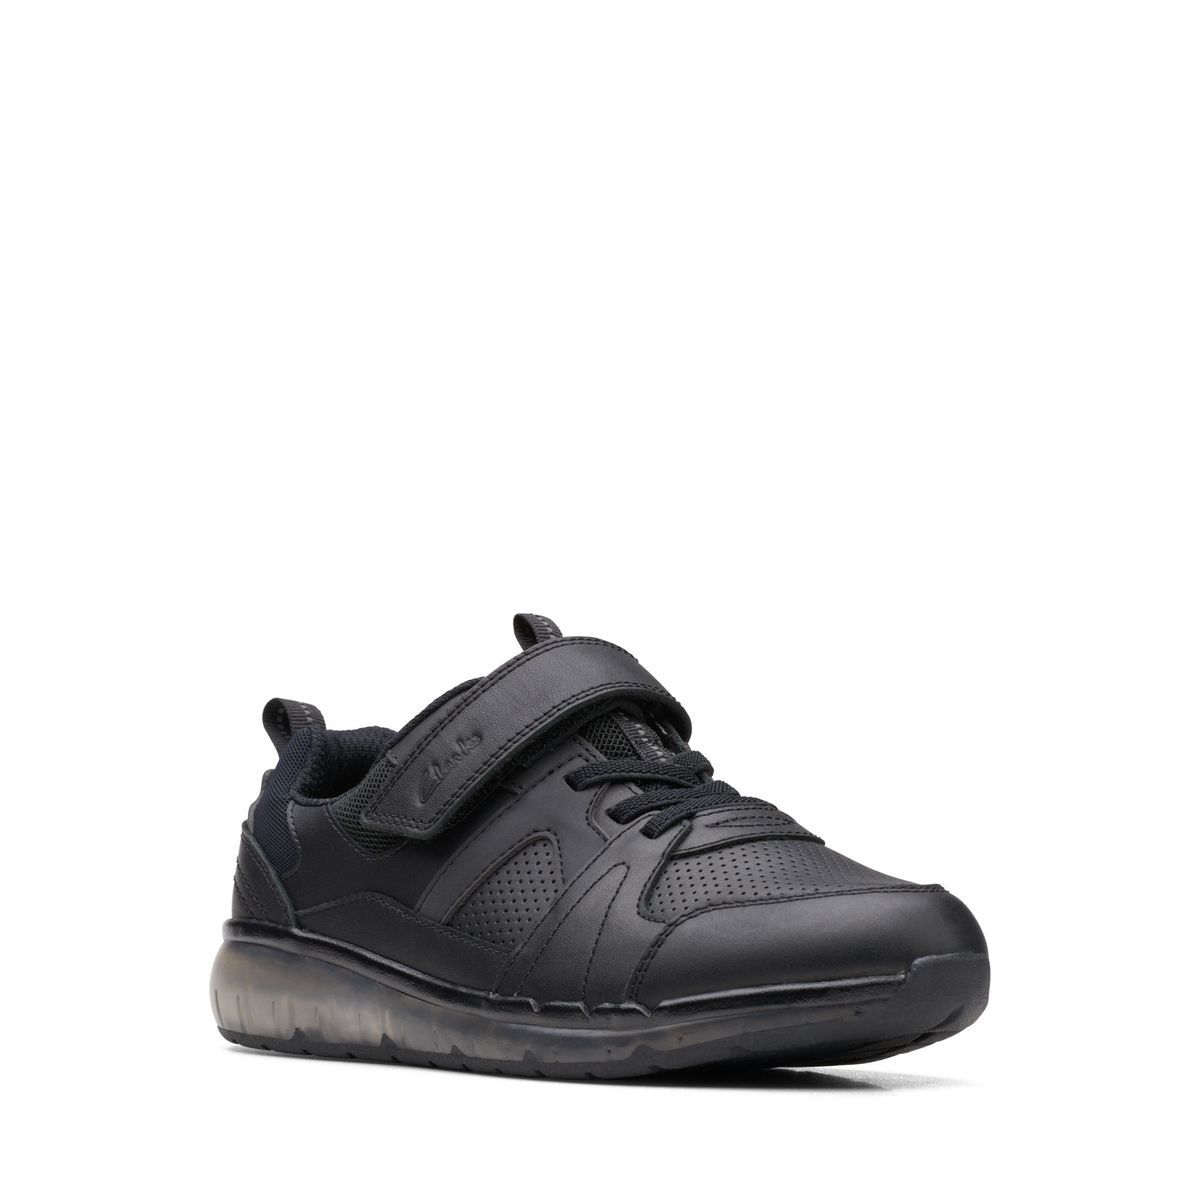 Clarks Spark Beam O Black leather Kids Boys Trainers 6791-86F in a Plain Leather in Size 3